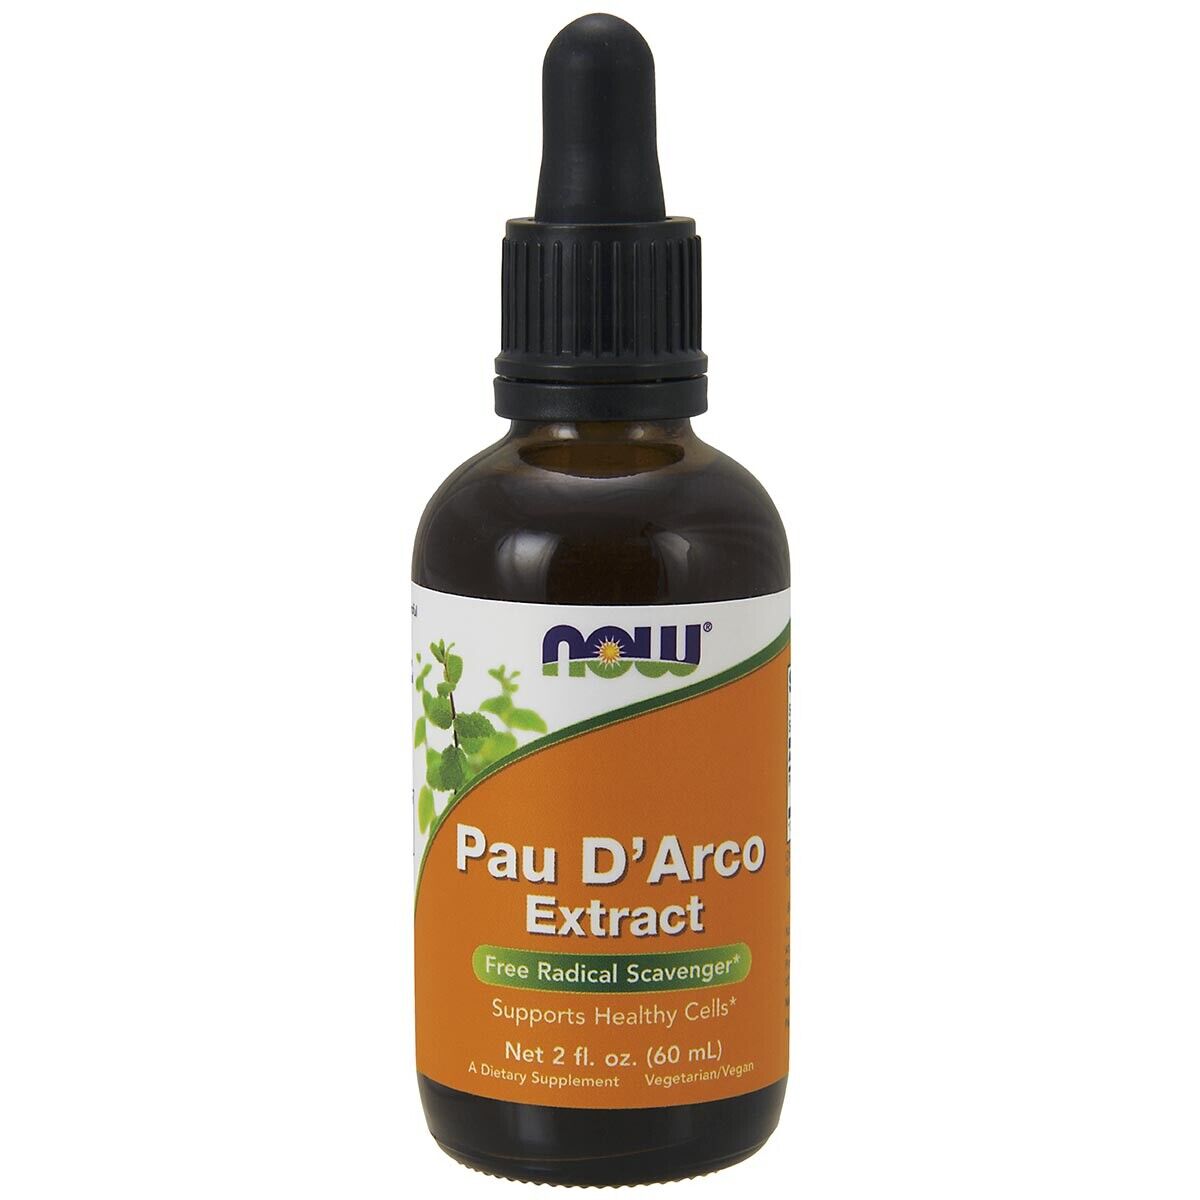 NOW Pau D'Arco Extract Liquid with Dropper, Free Radical Scavenger*, 2-Ounce